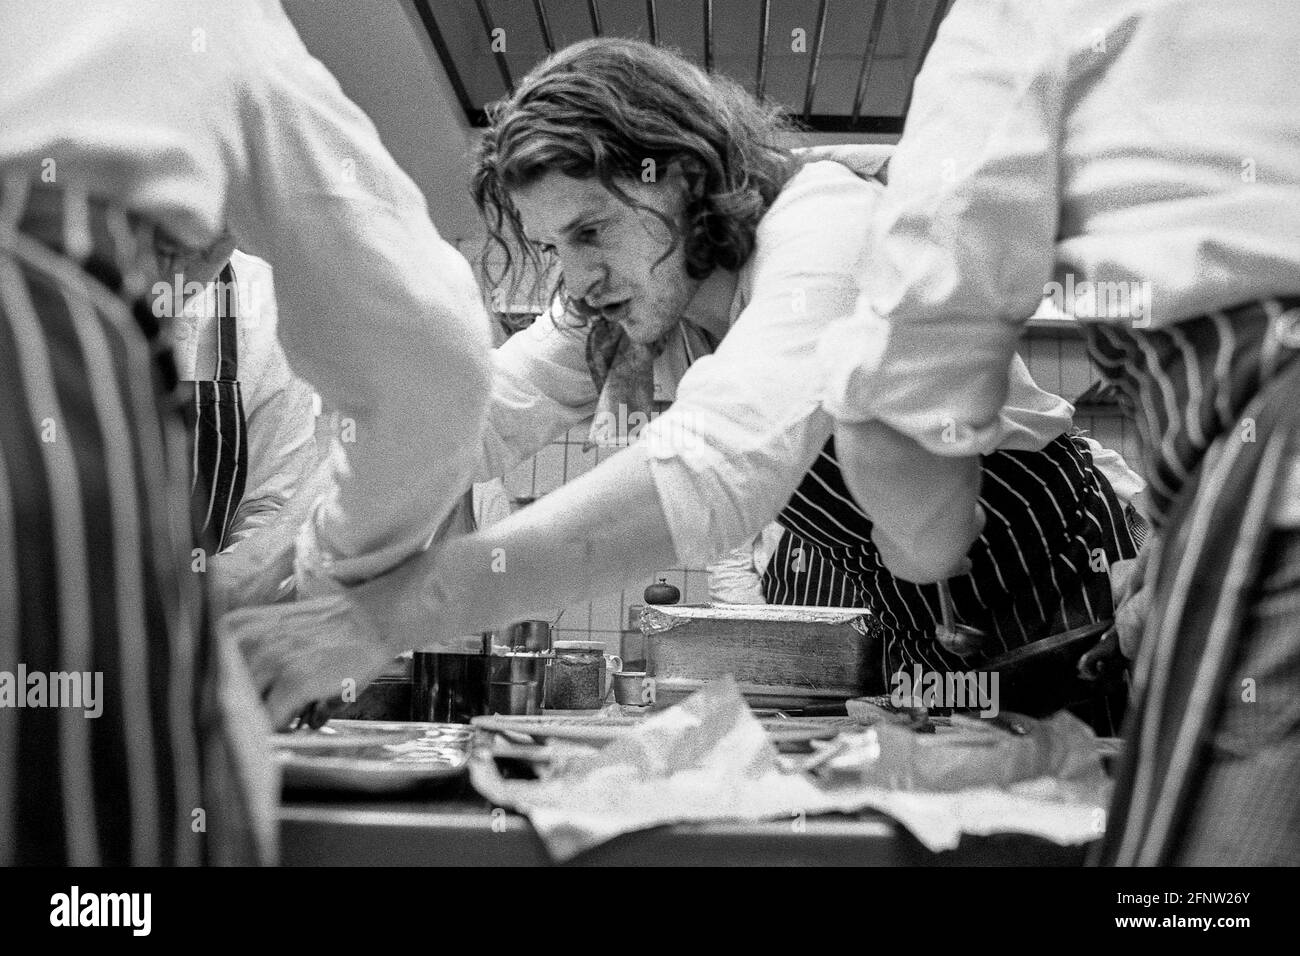 Celebrity chef Marco Pierre White in the kitchen of Harvey's restaurant in Wandsworth at the height of his growing fame. London - 1989, UK Stock Photo